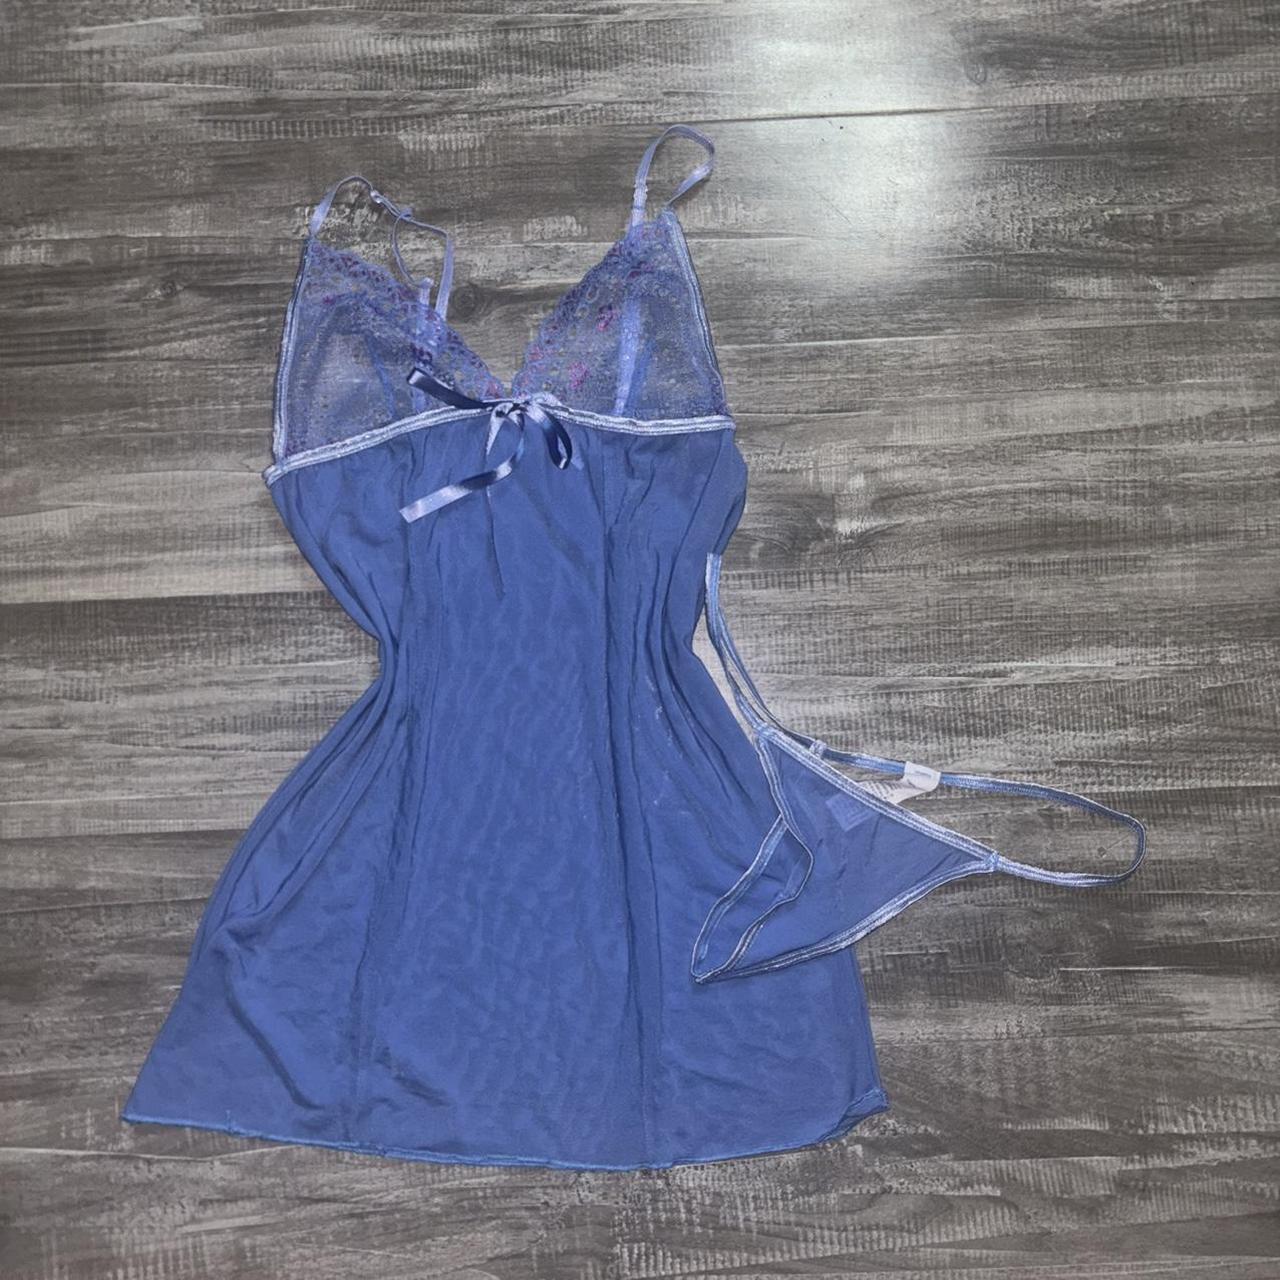 VS PINK baby blue cupped bra 32C #supportive #sexy - Depop